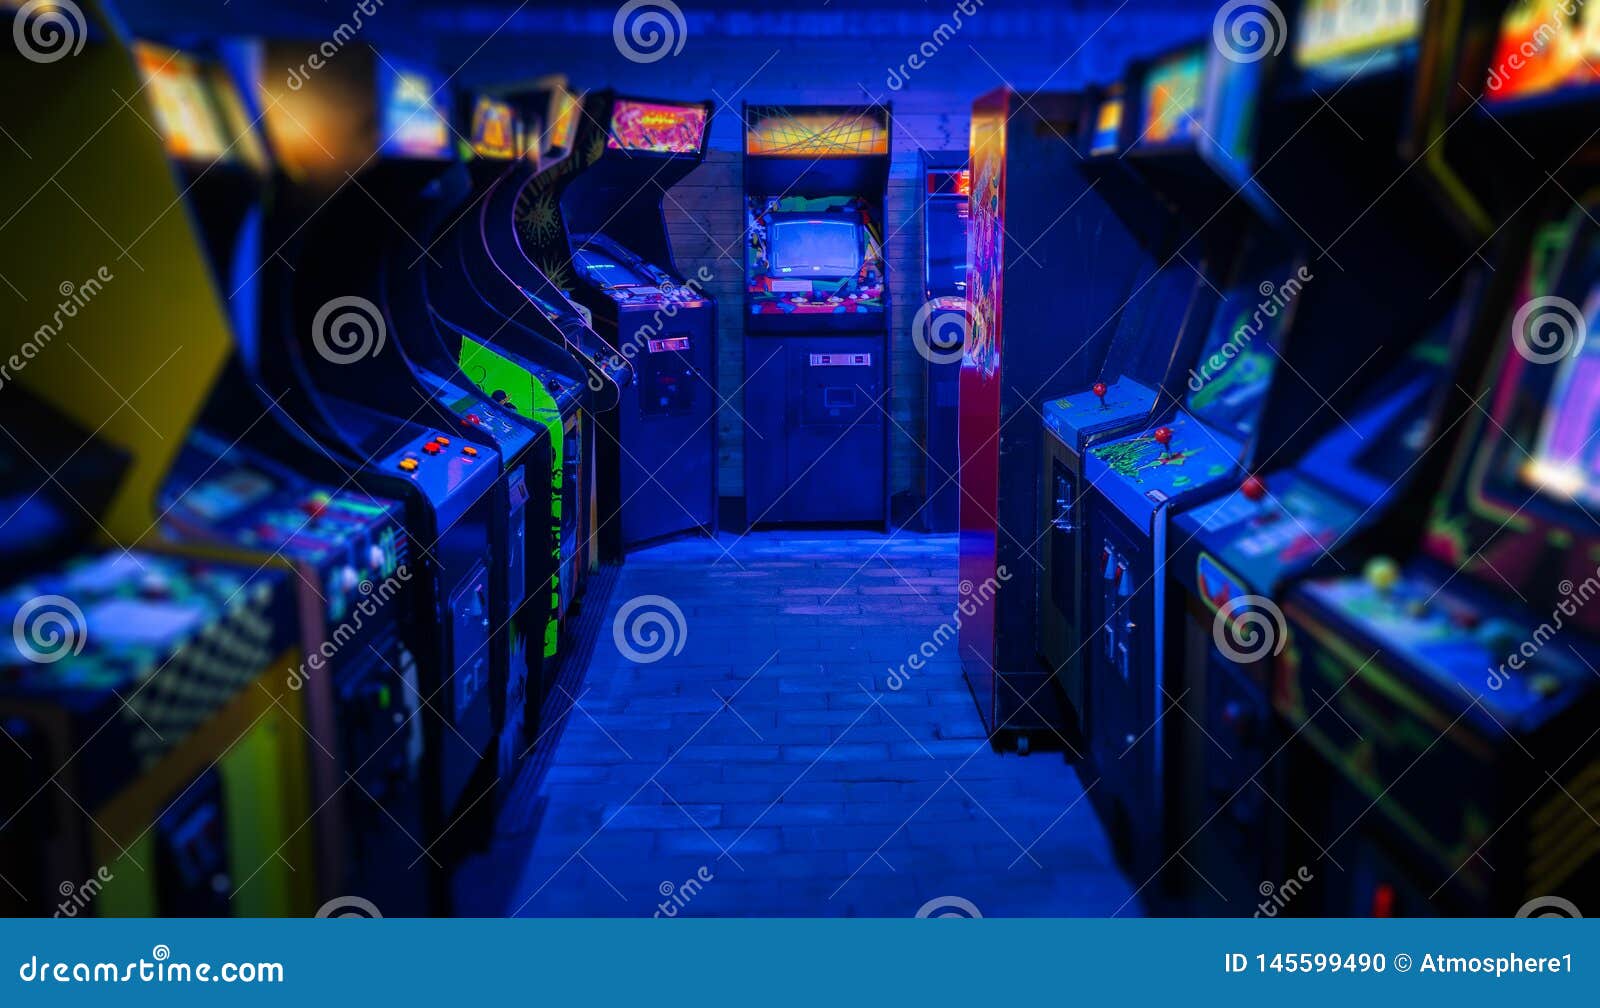 old vintage arcade video games in an empty dark gaming room with blue light with glowing displays